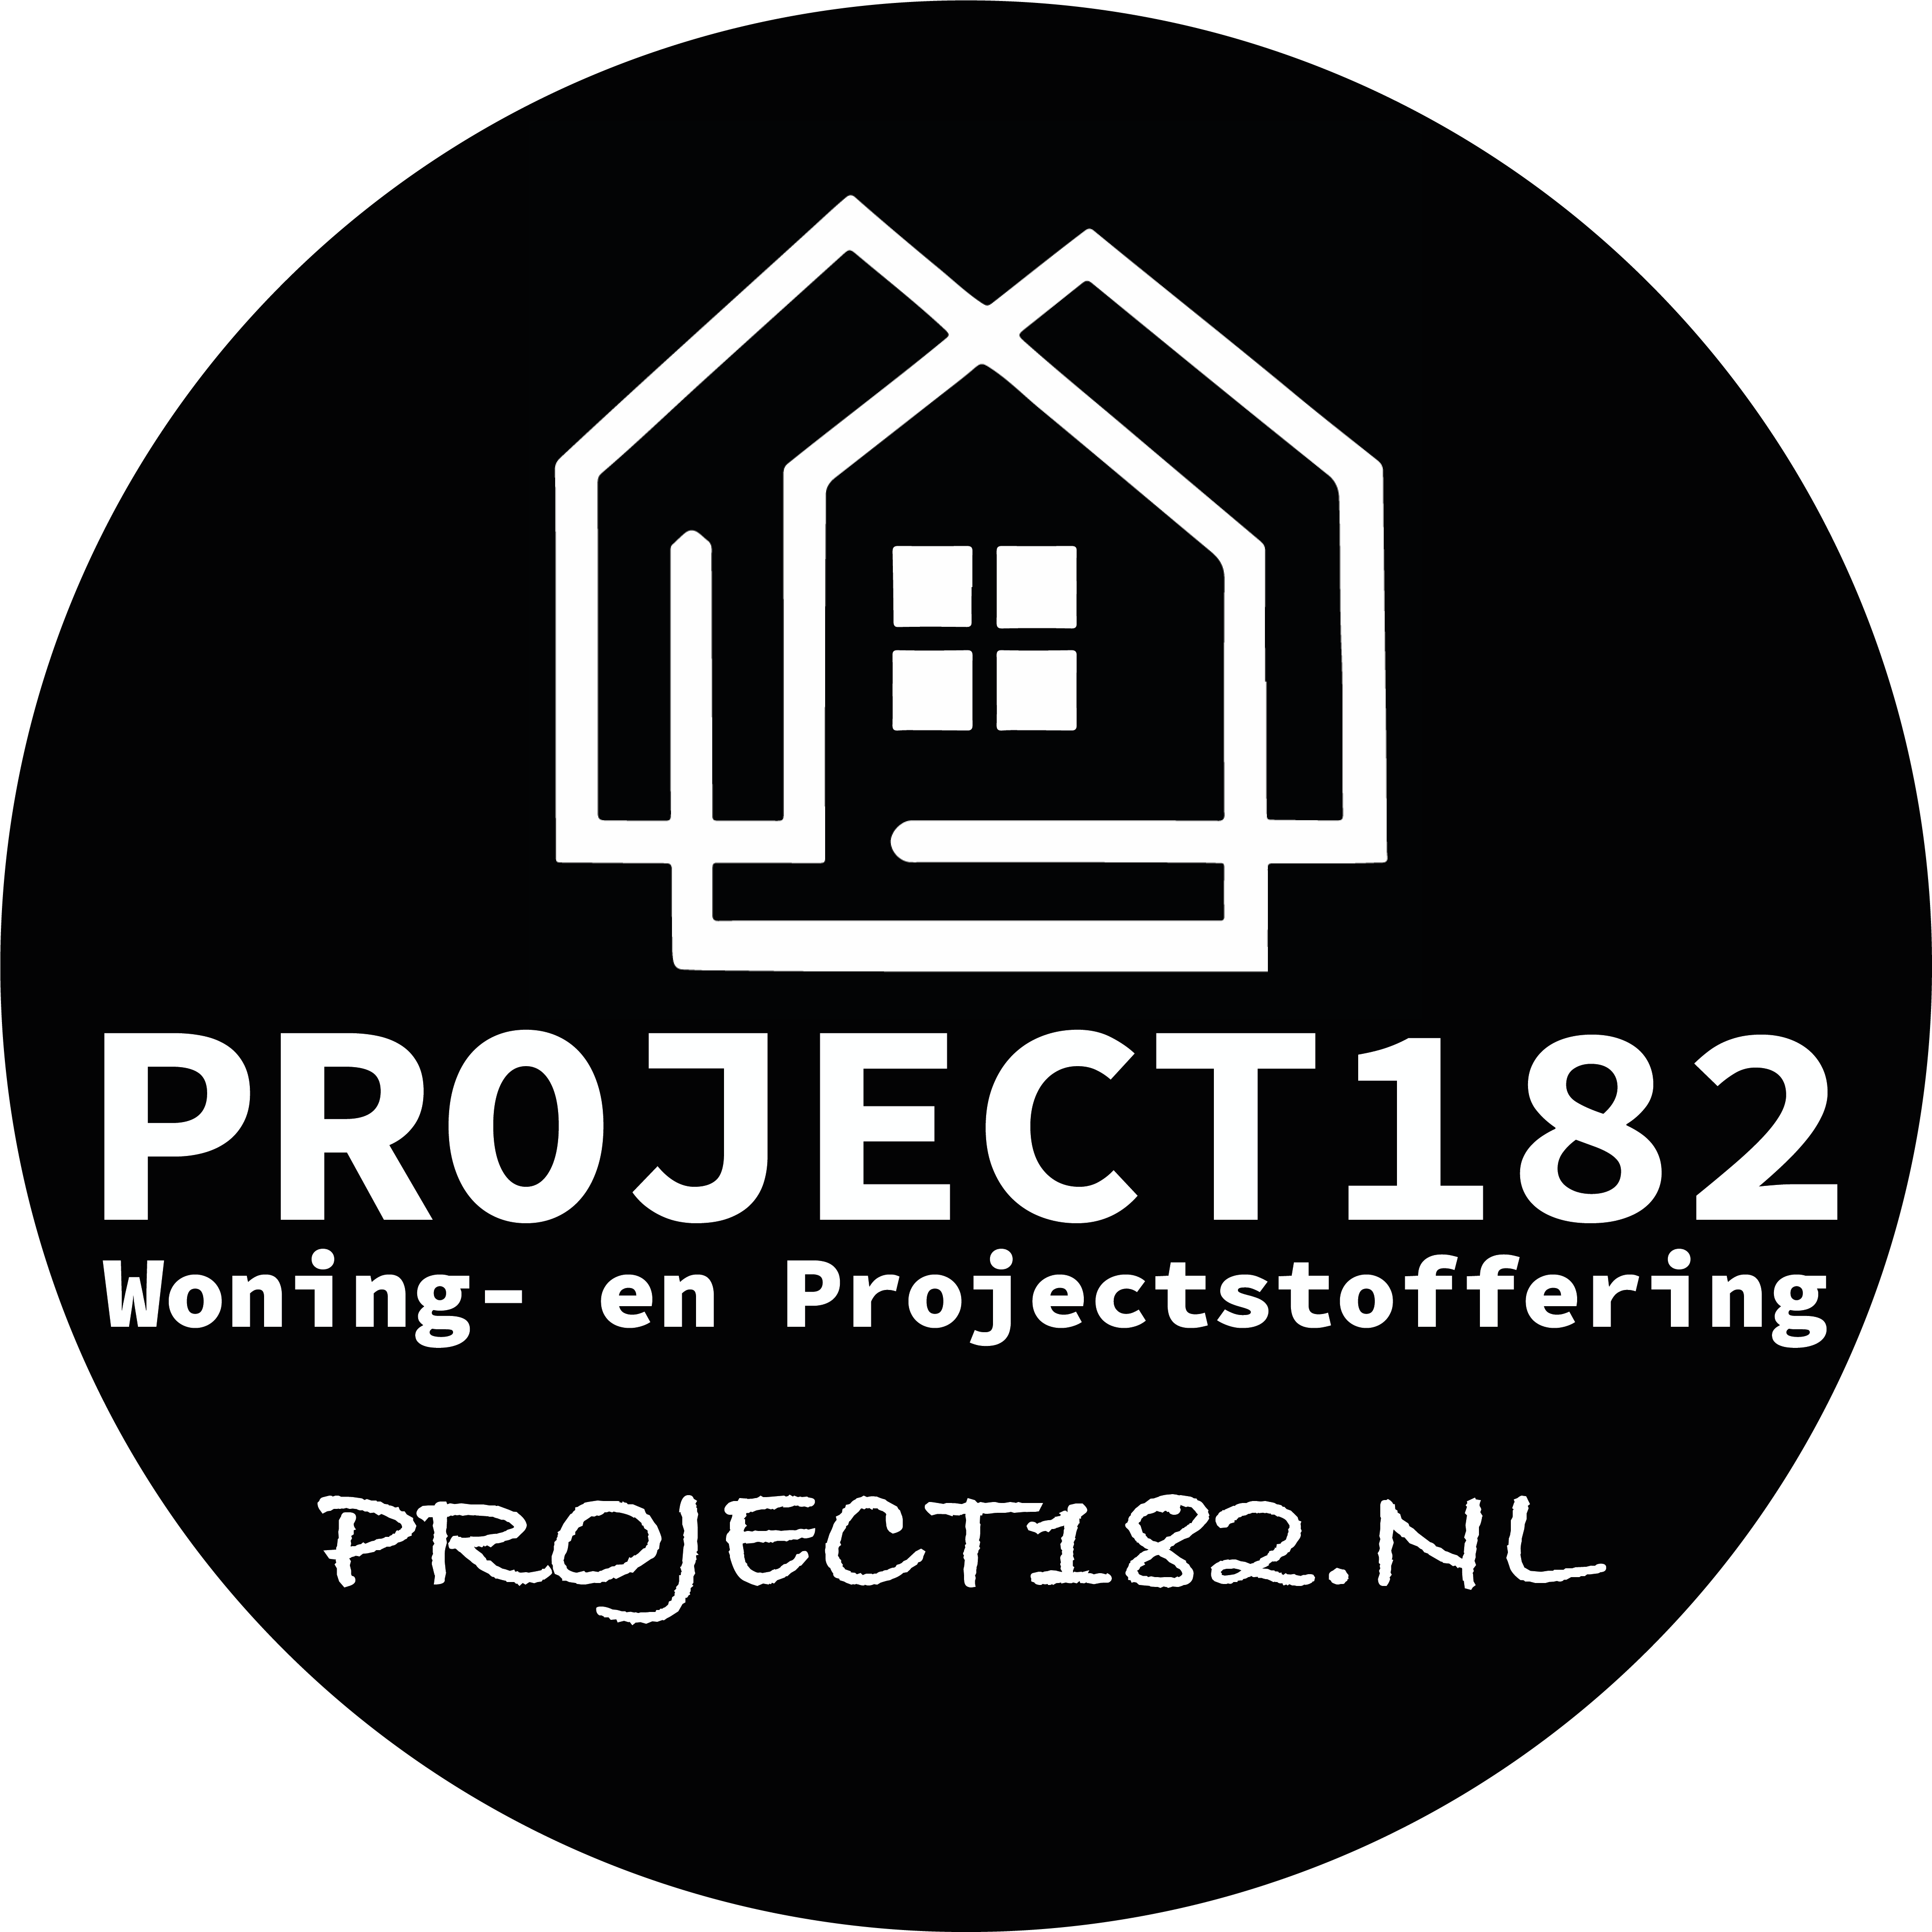 PROJECT182